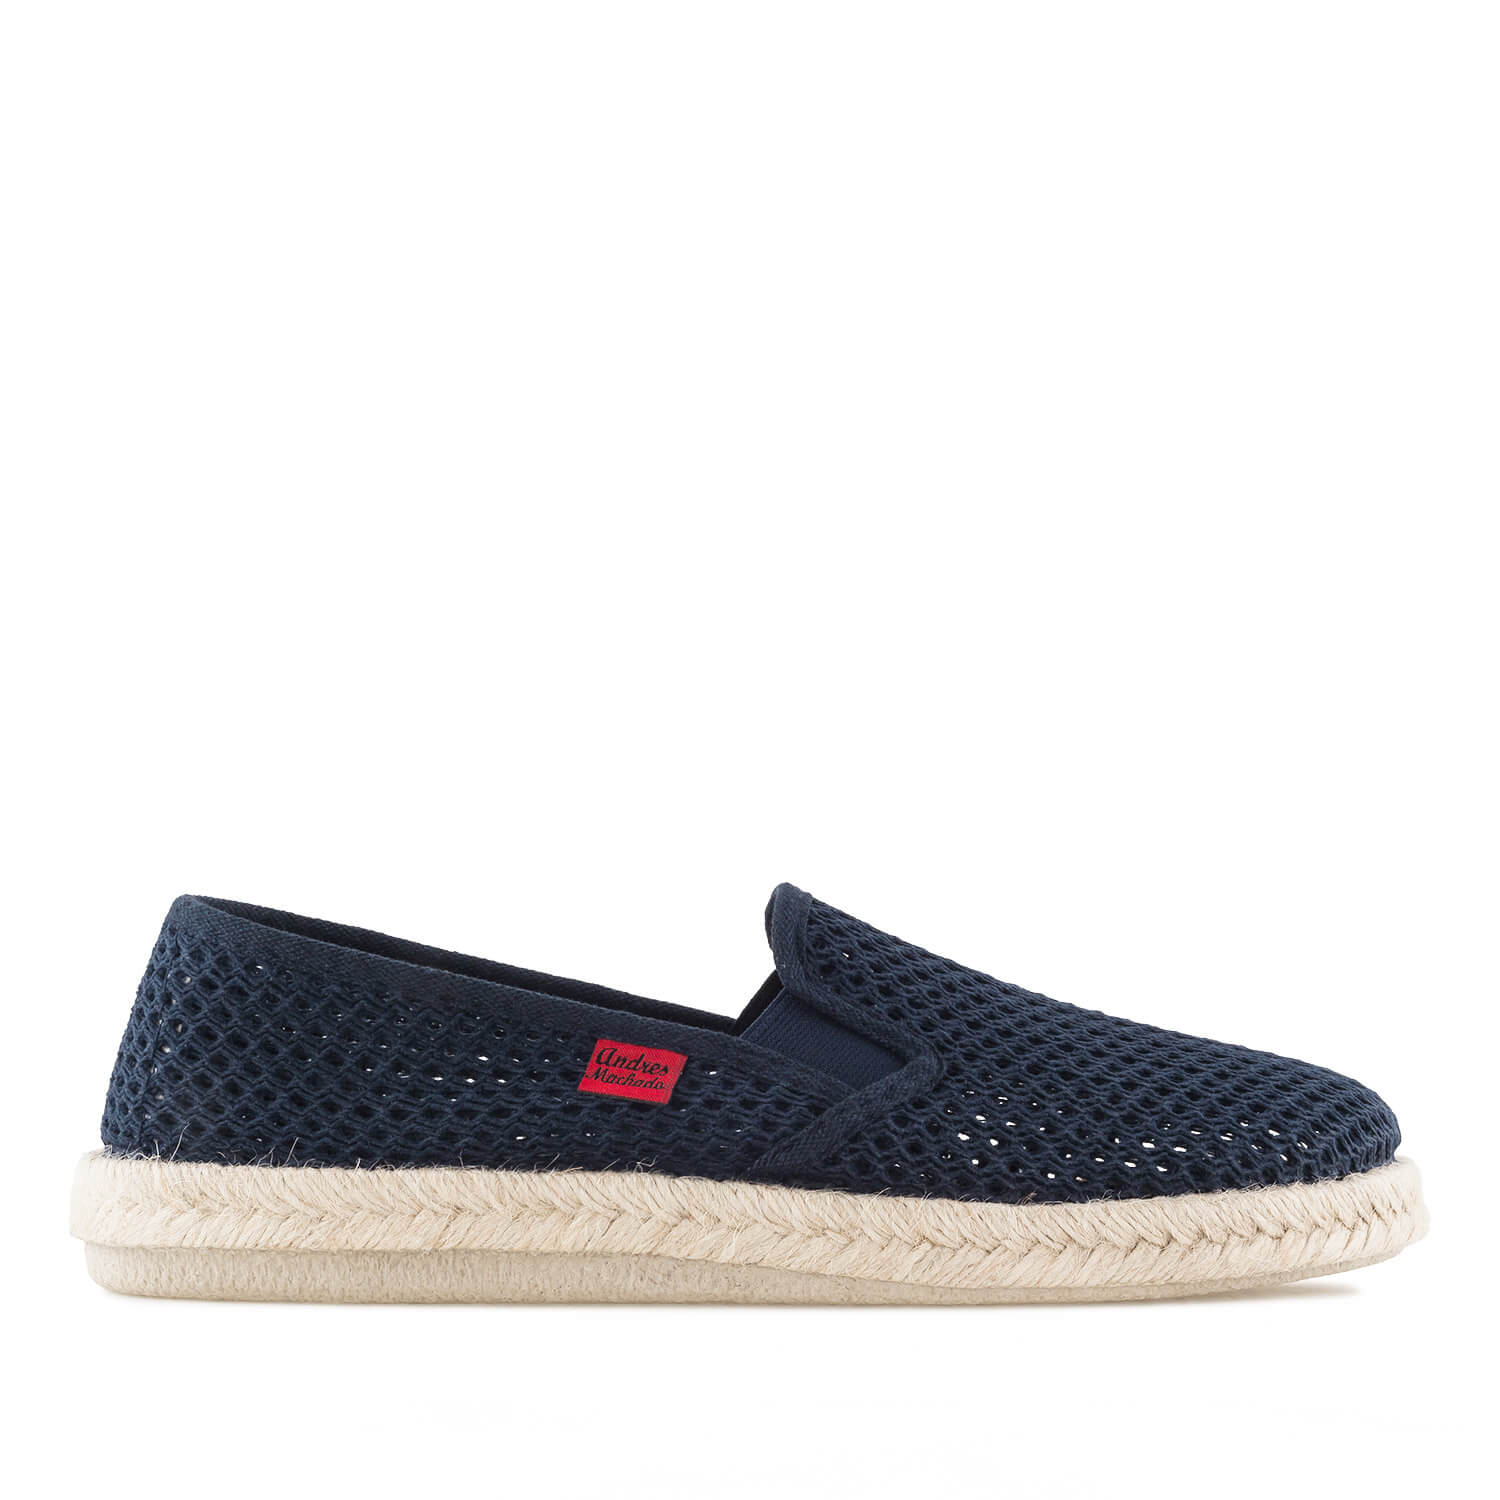 Mythical Navy Blue Mesh Slip-On Shoes with Jute and Rubber Sole 